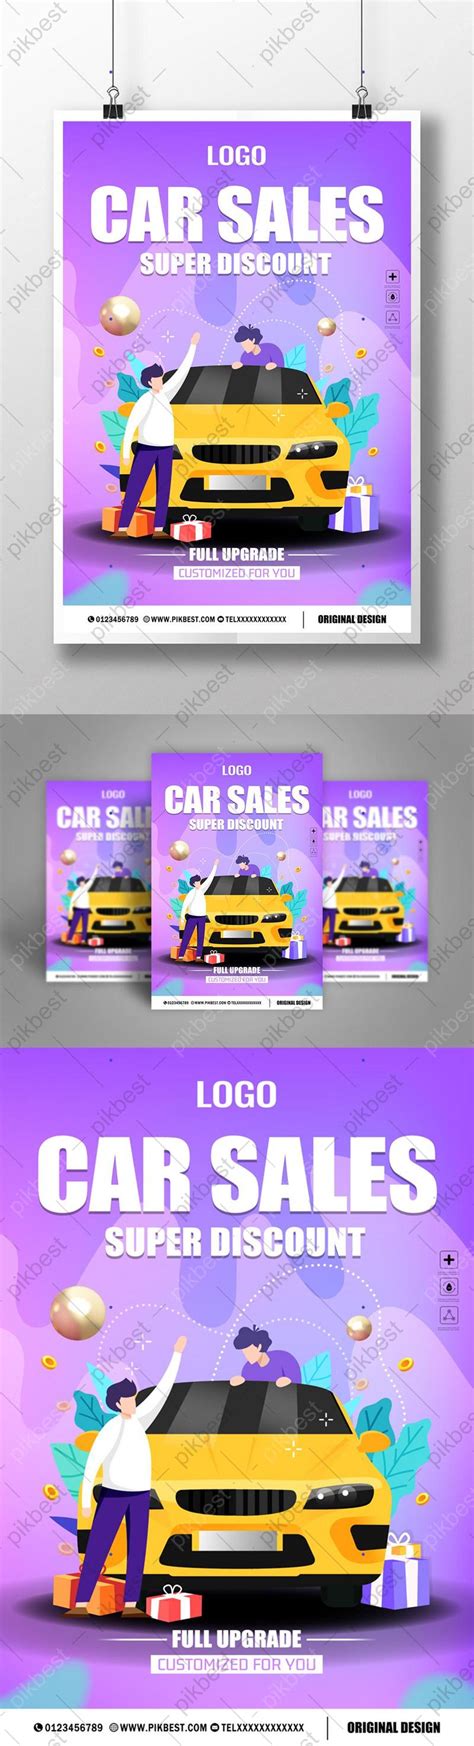 Purple Cartoon Car Sale Promotion Discount New Sale Poster Template | PSD Free Download - Pikbest